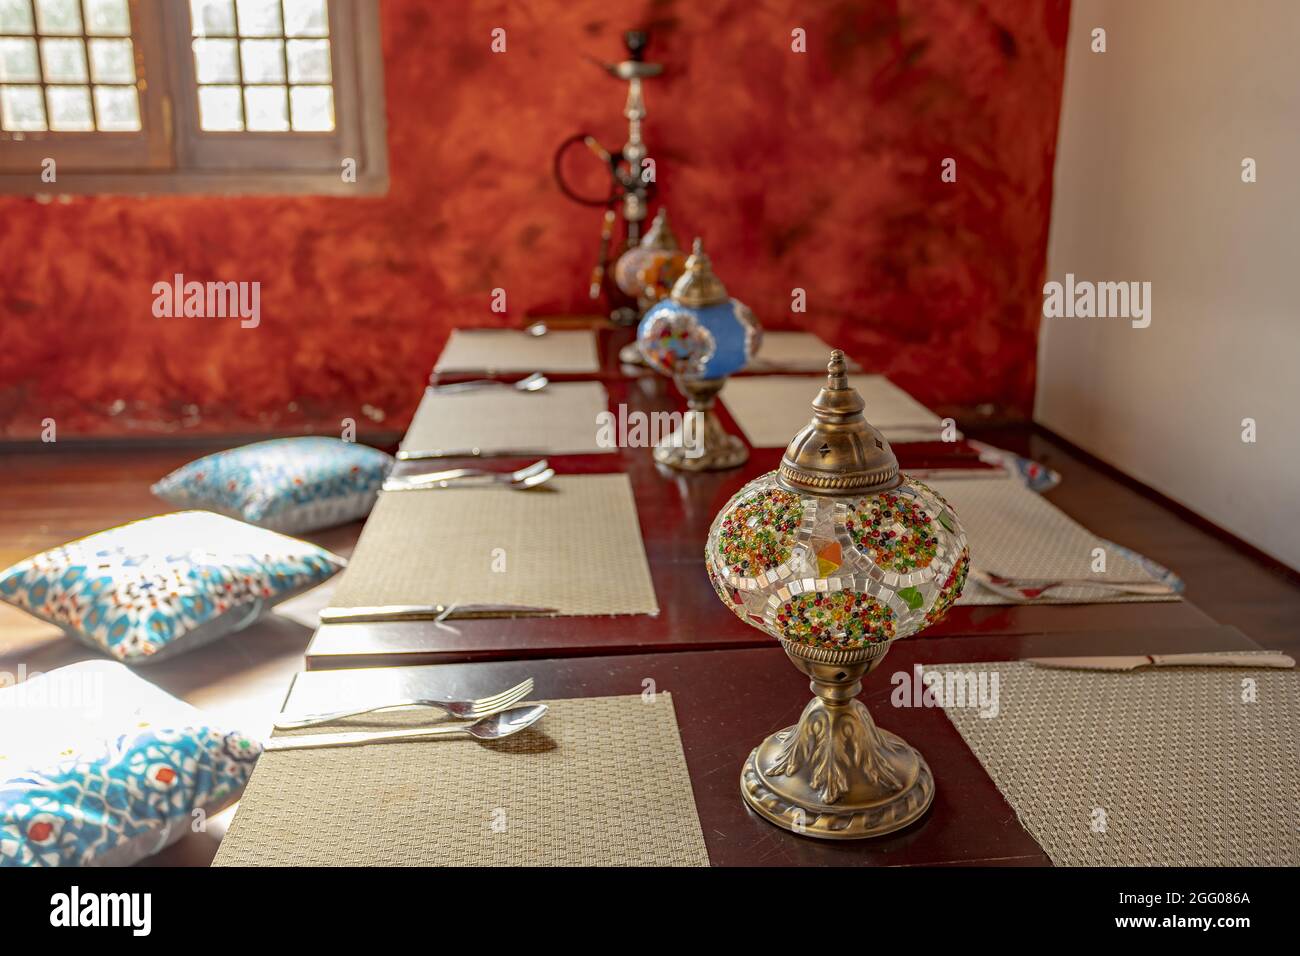 Traditional Middle Eastern dining setting with woven mats on tables and pillows on the floor Stock Photo